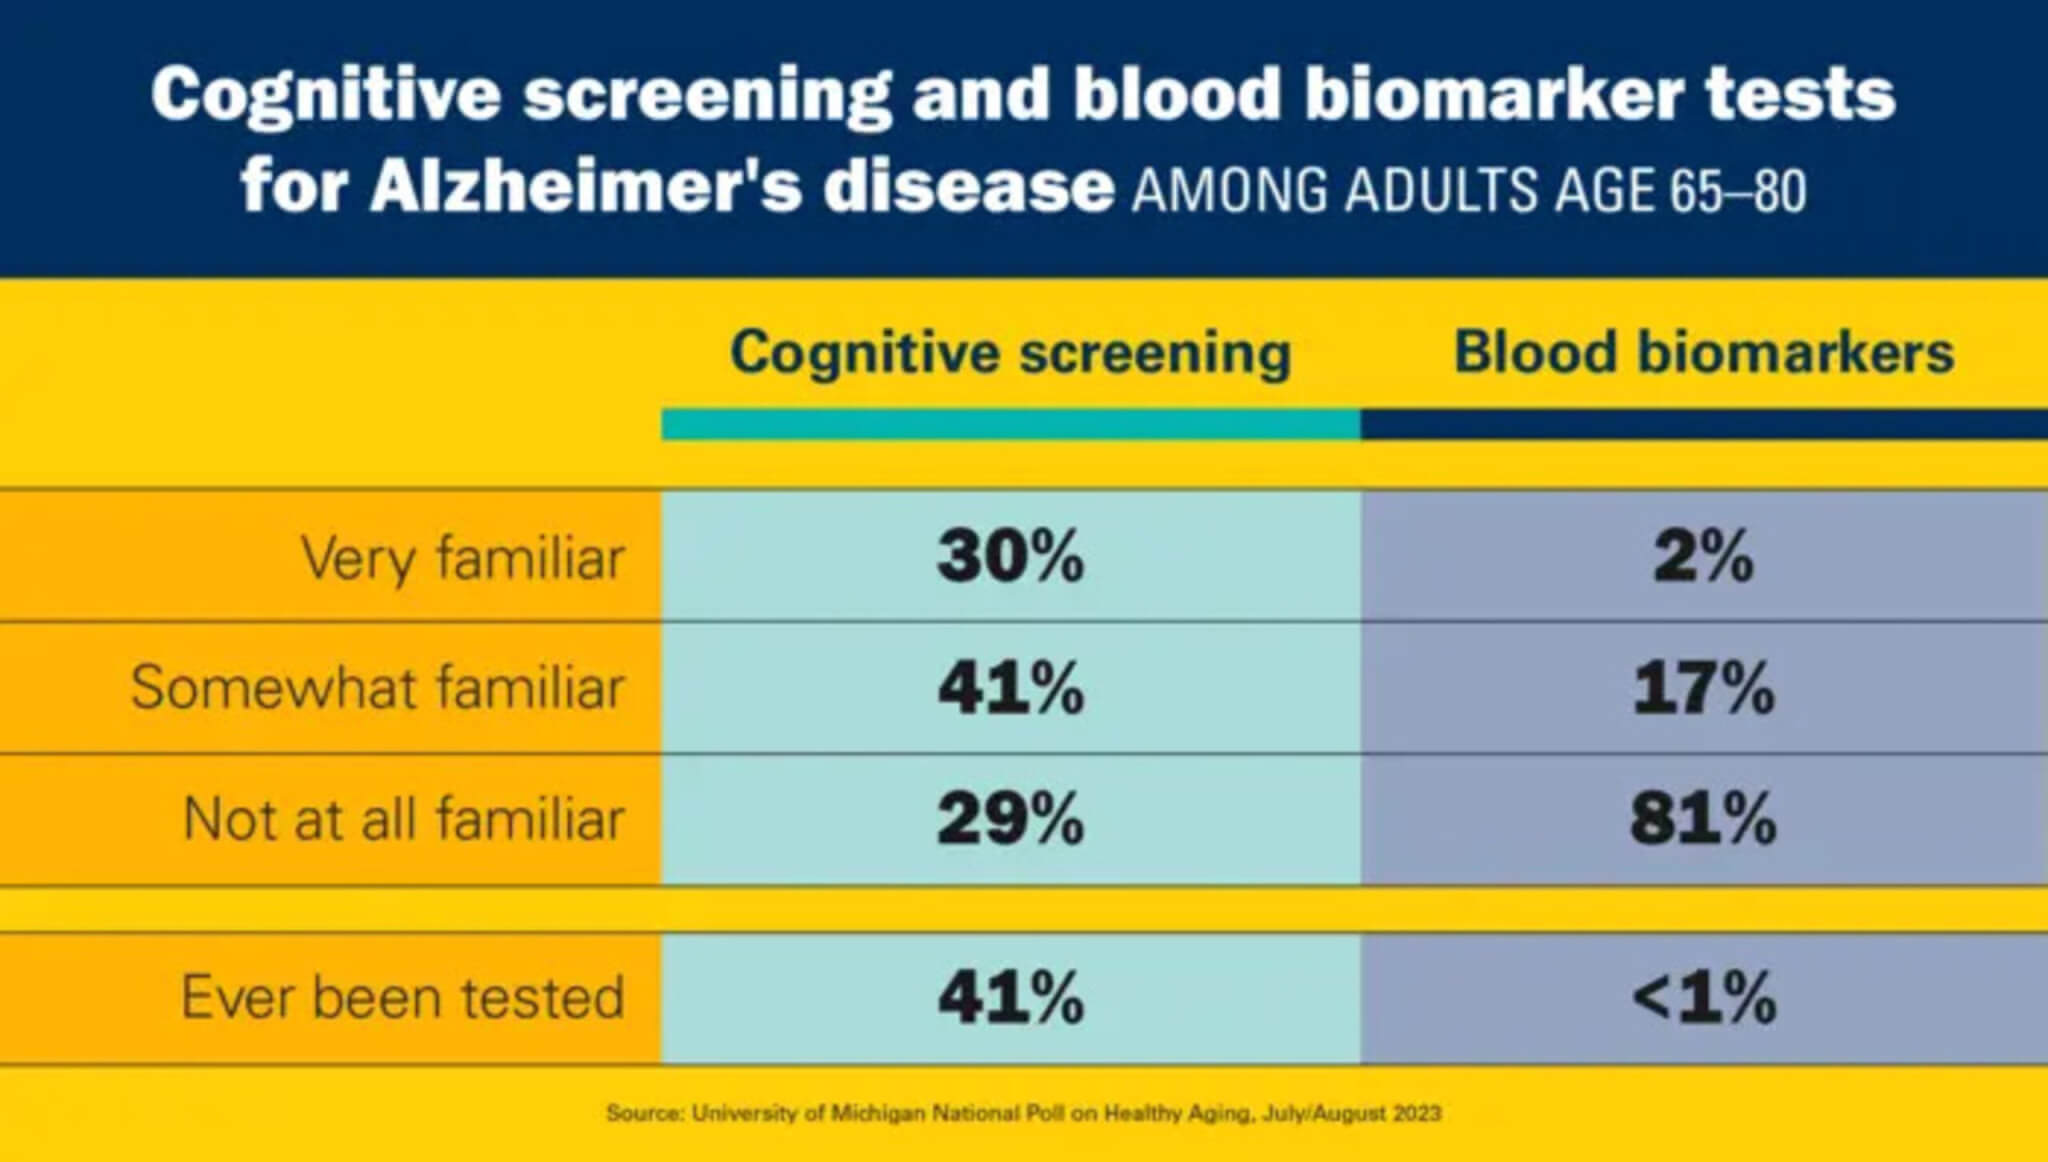 Familiarity with, and experience with, cognitive testing and Alzheimer's biomarker testing among adults age 65-80